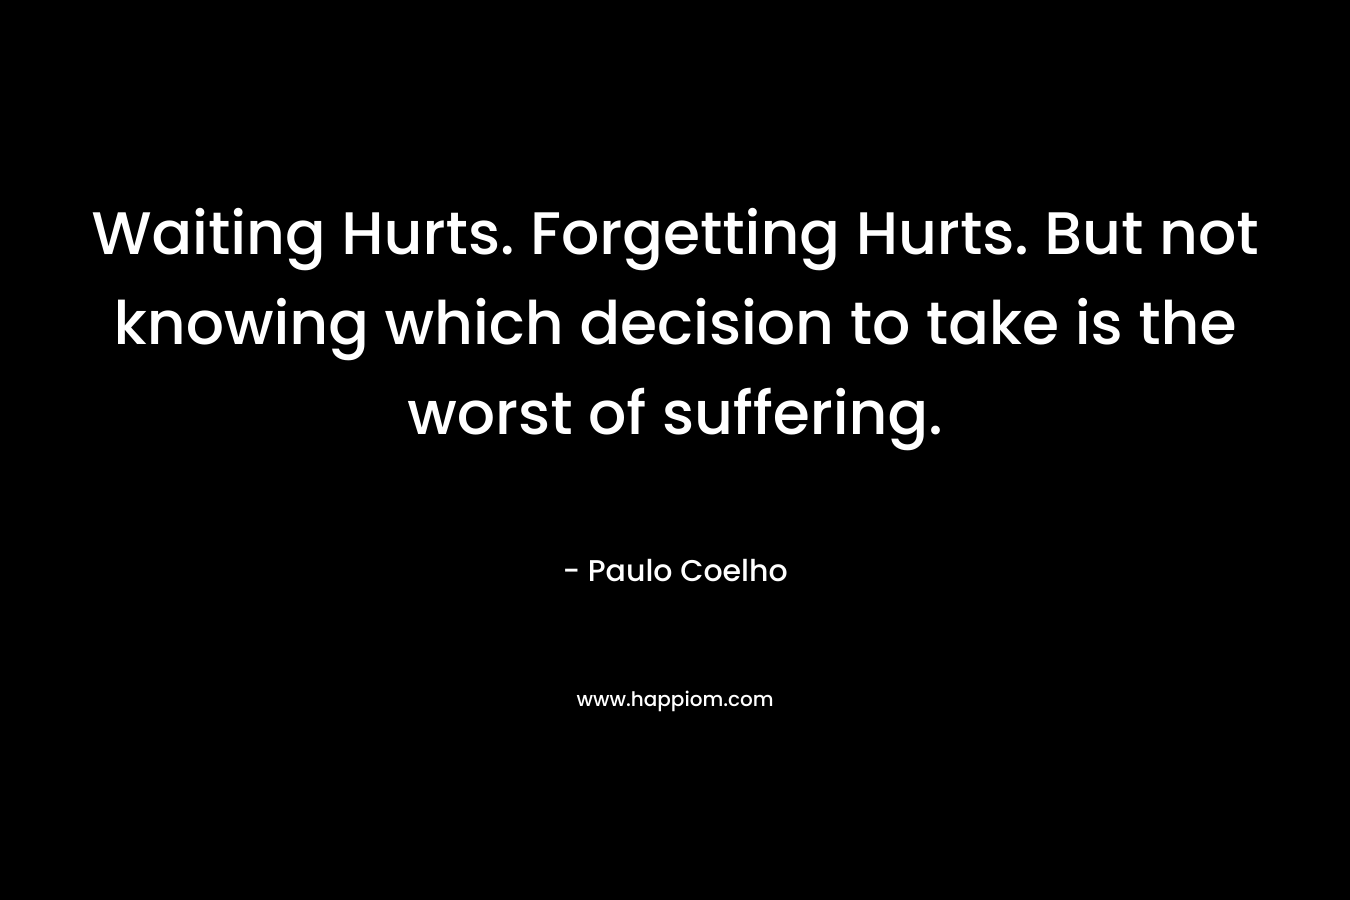 Waiting Hurts. Forgetting Hurts. But not knowing which decision to take is the worst of suffering.